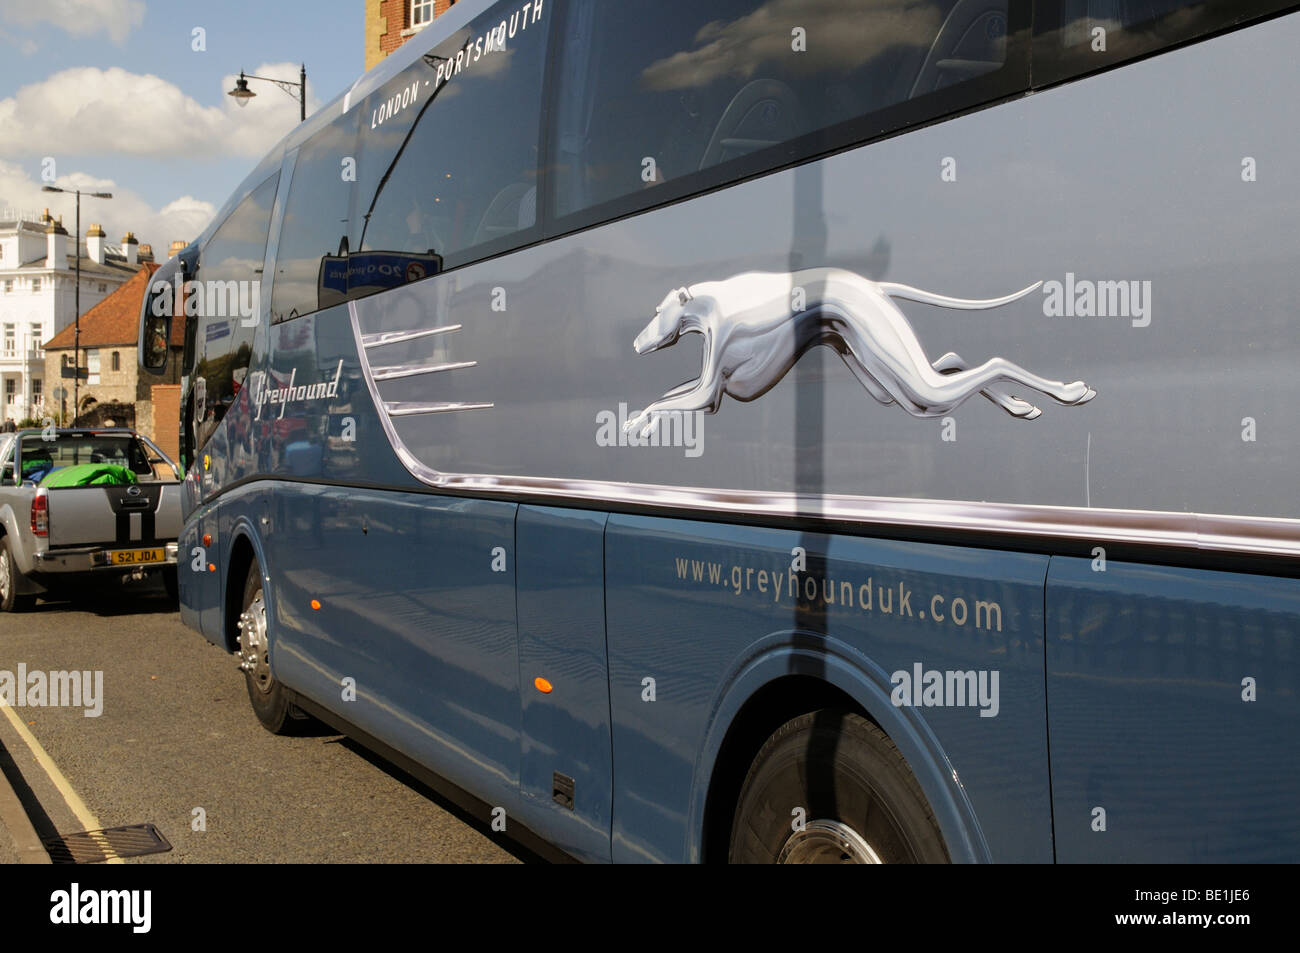 A British Greyhound Lines bus named Proud Mary in Southampton on the first day of the new London service Stock Photo